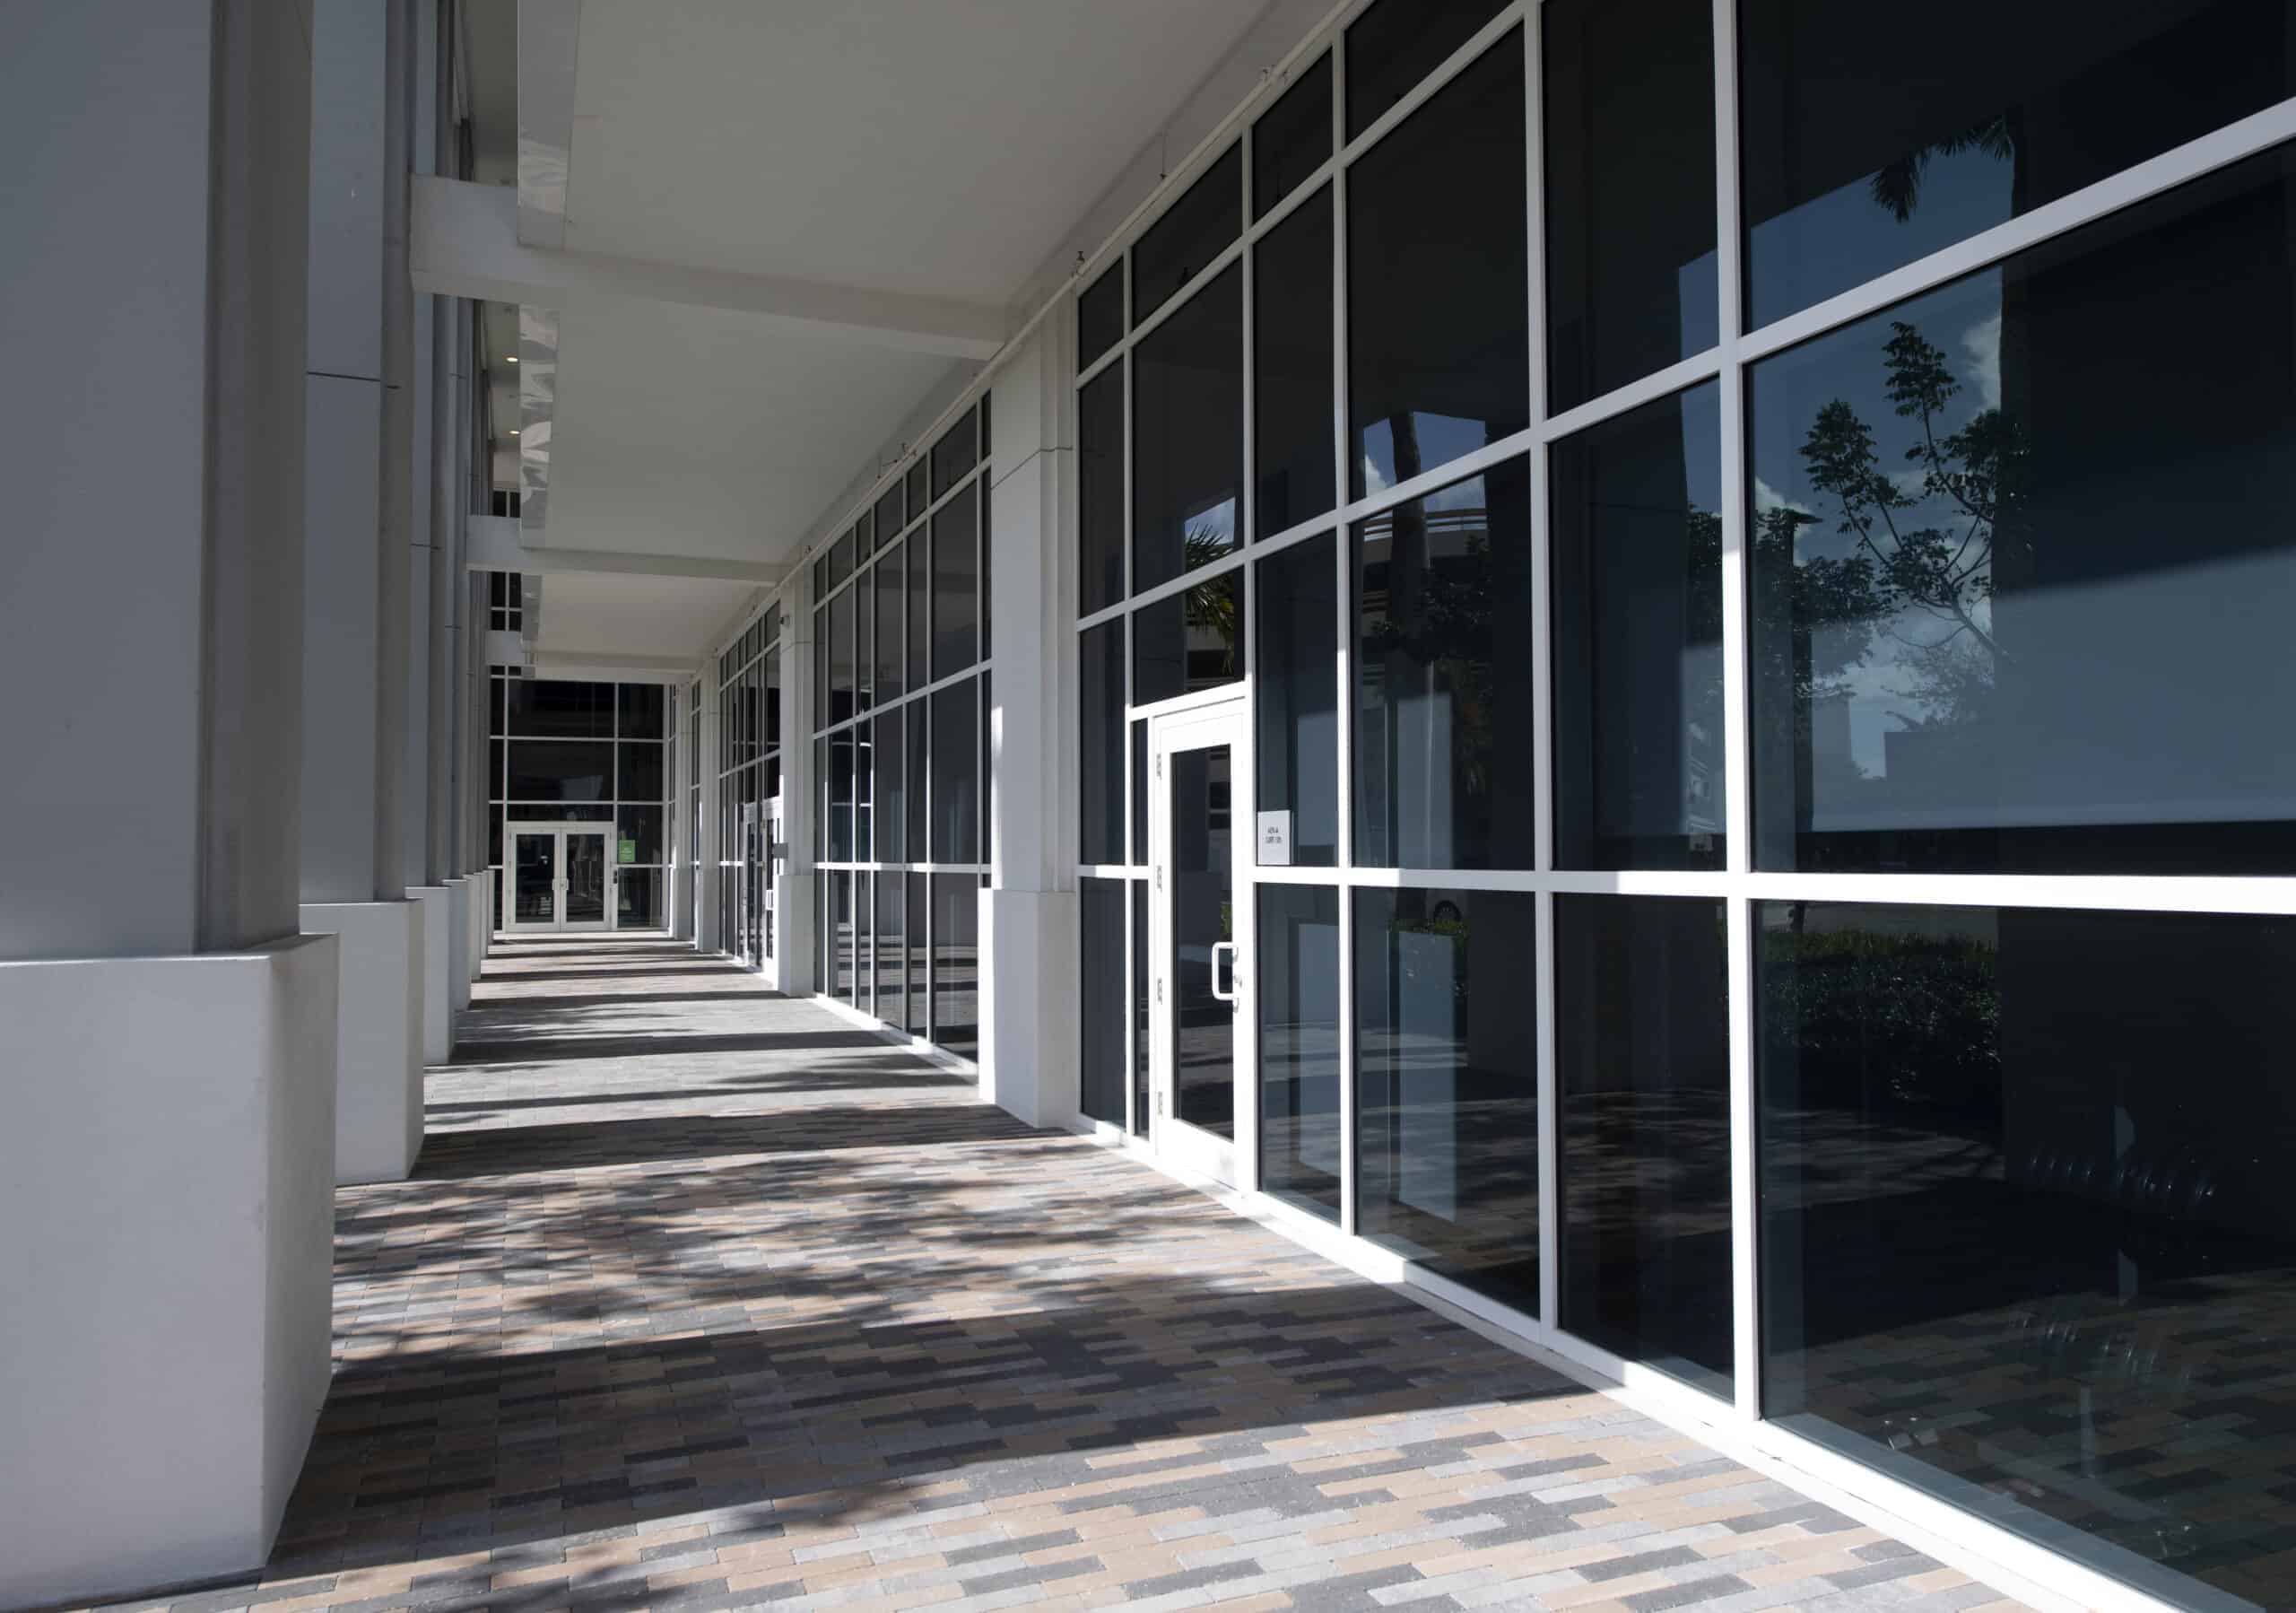 FS-300 glass storefront system with a K2 Summit entrance door from Aldora